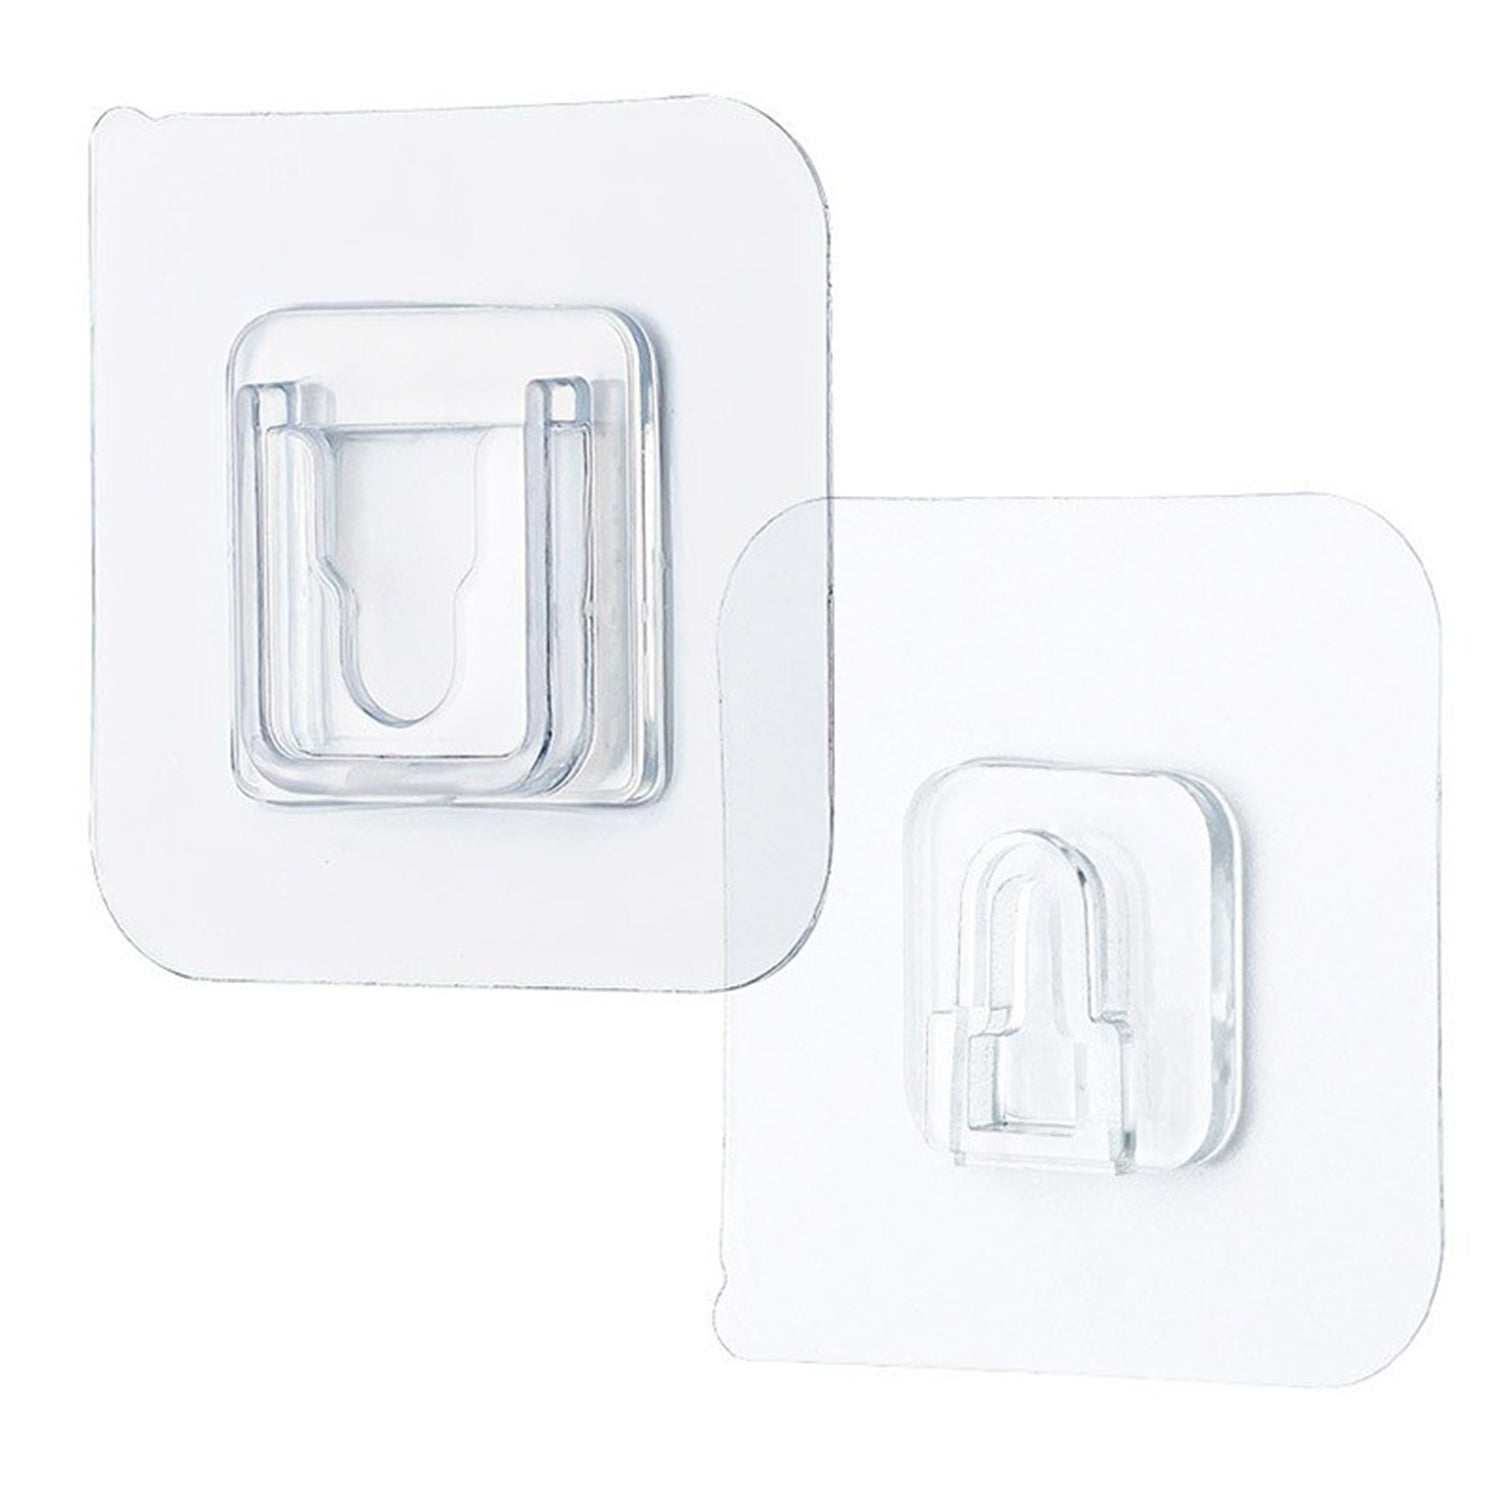 7433 Transparent Adhesive Male Hook Used For Hanging Various Types Of Items (1Pc) 